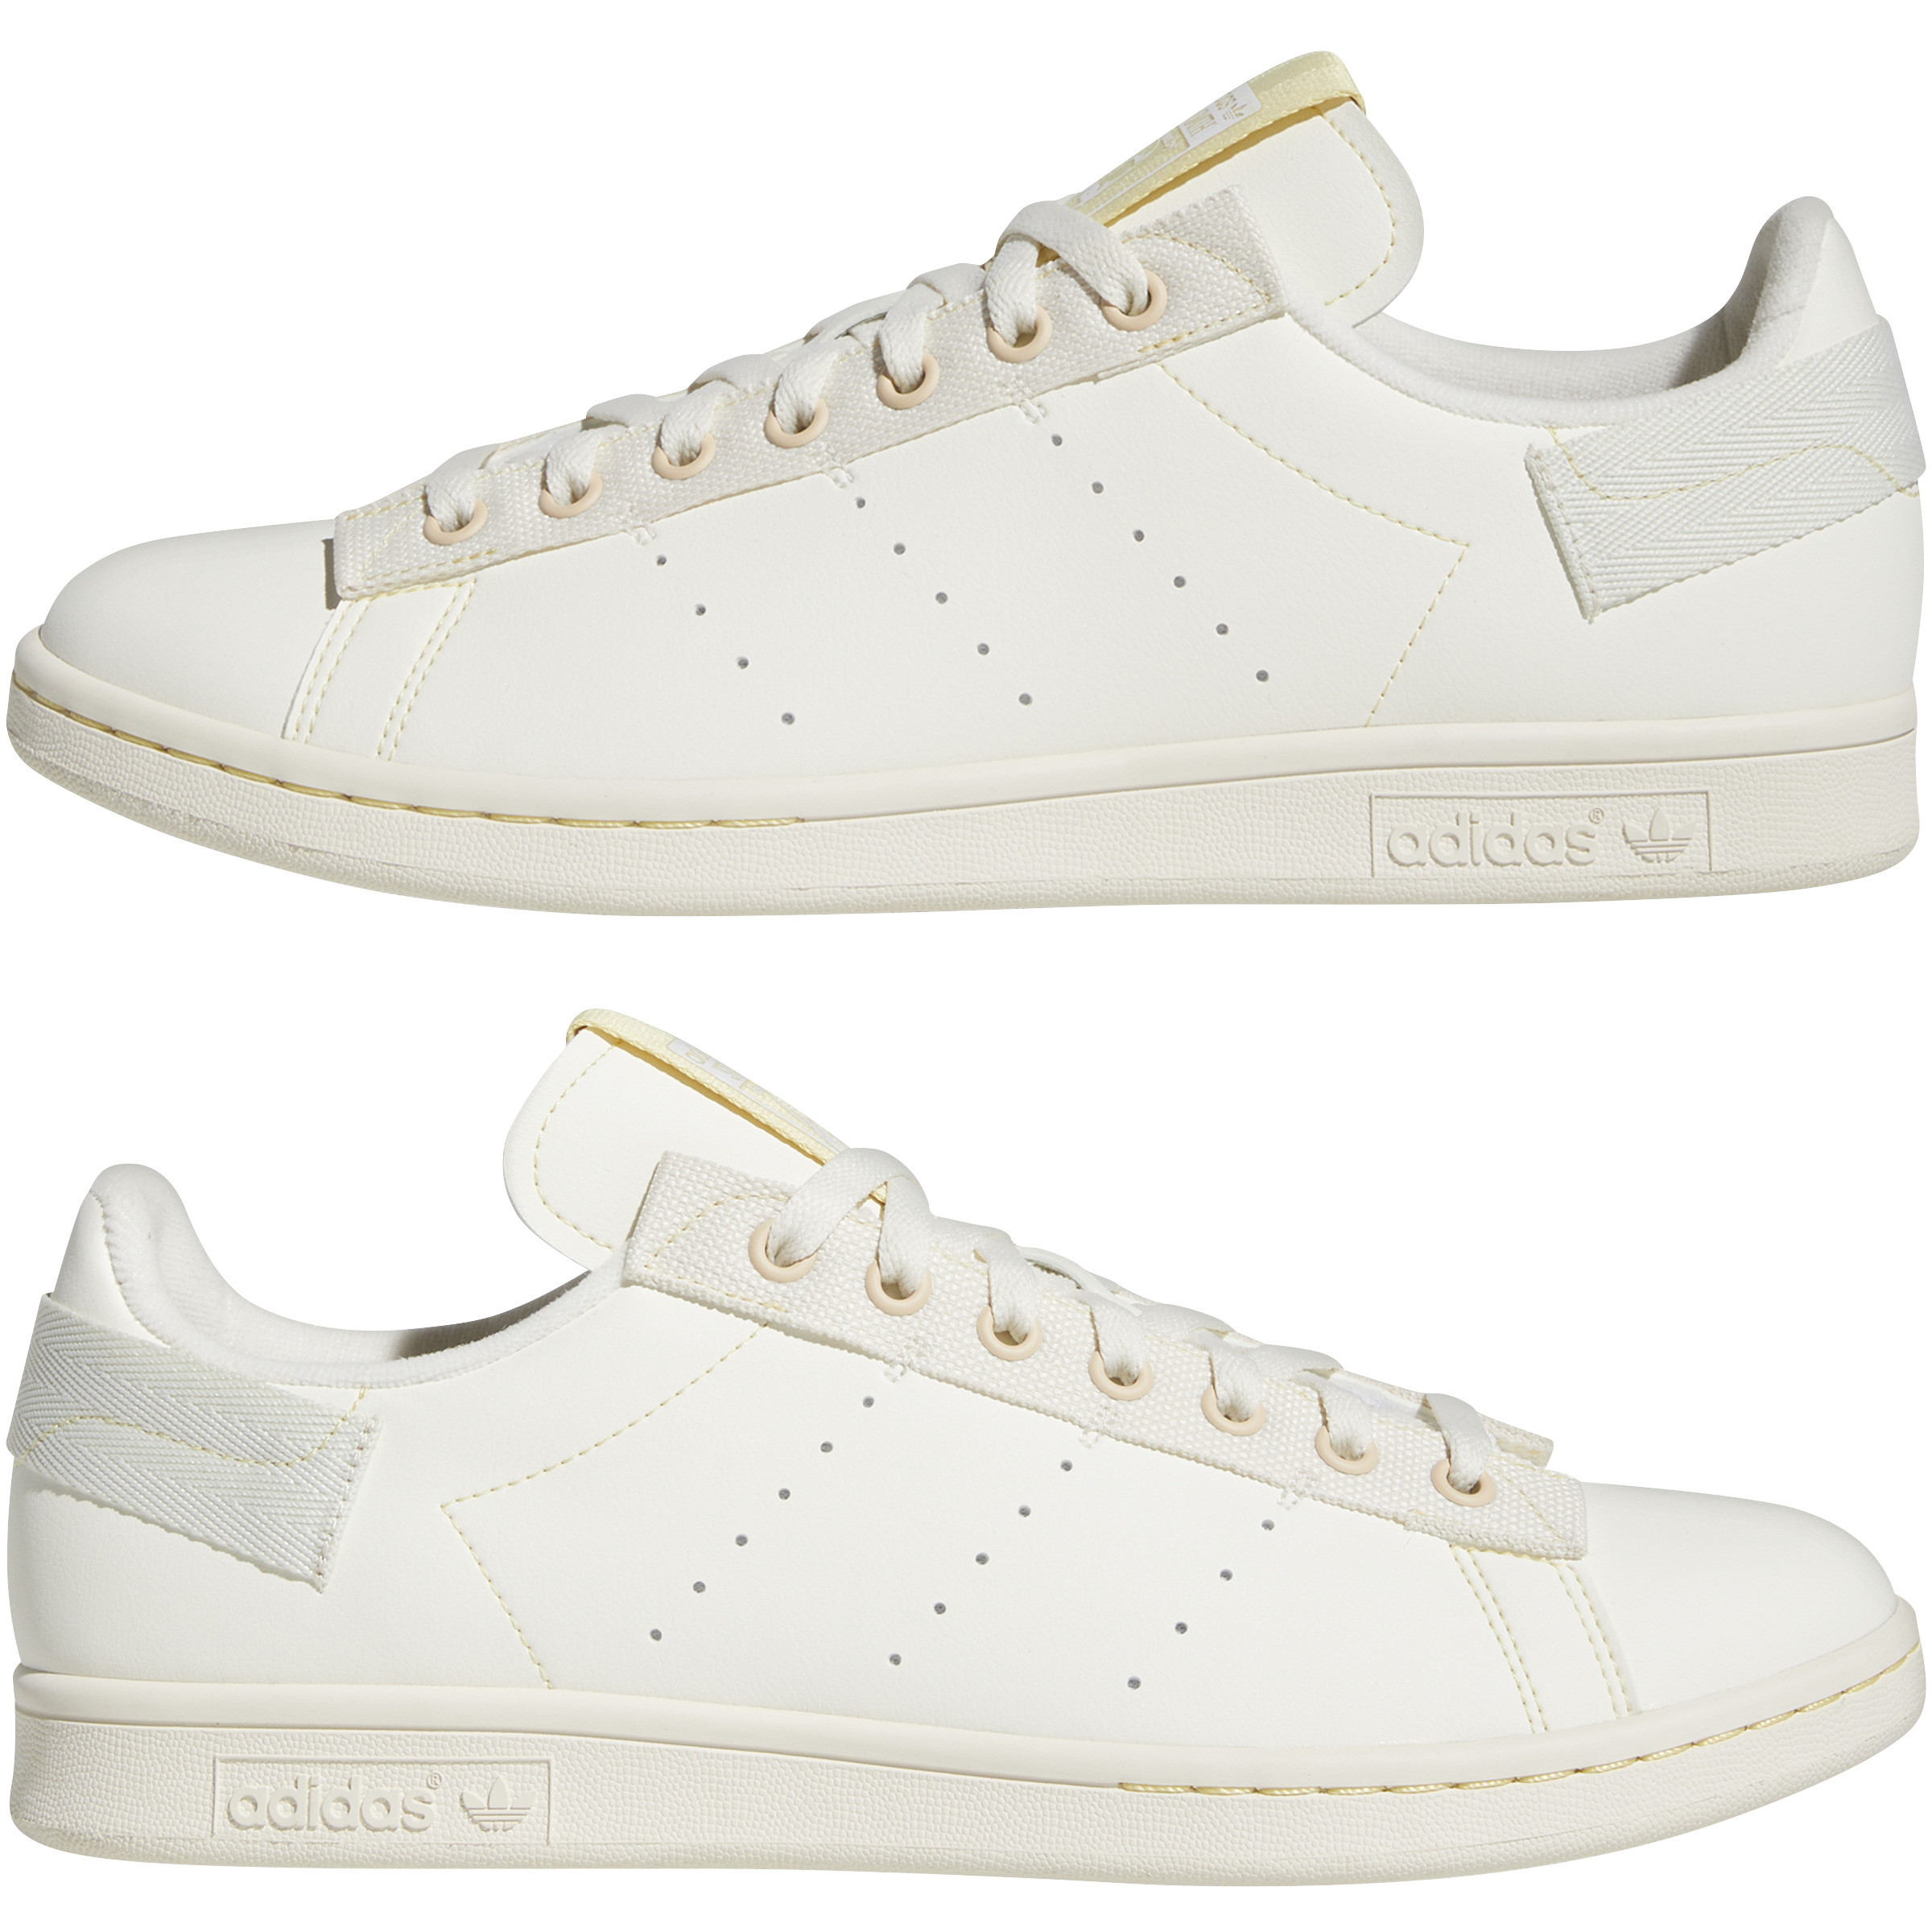 Adidas - Stan Smith Parley Shoes, White, large image number 9